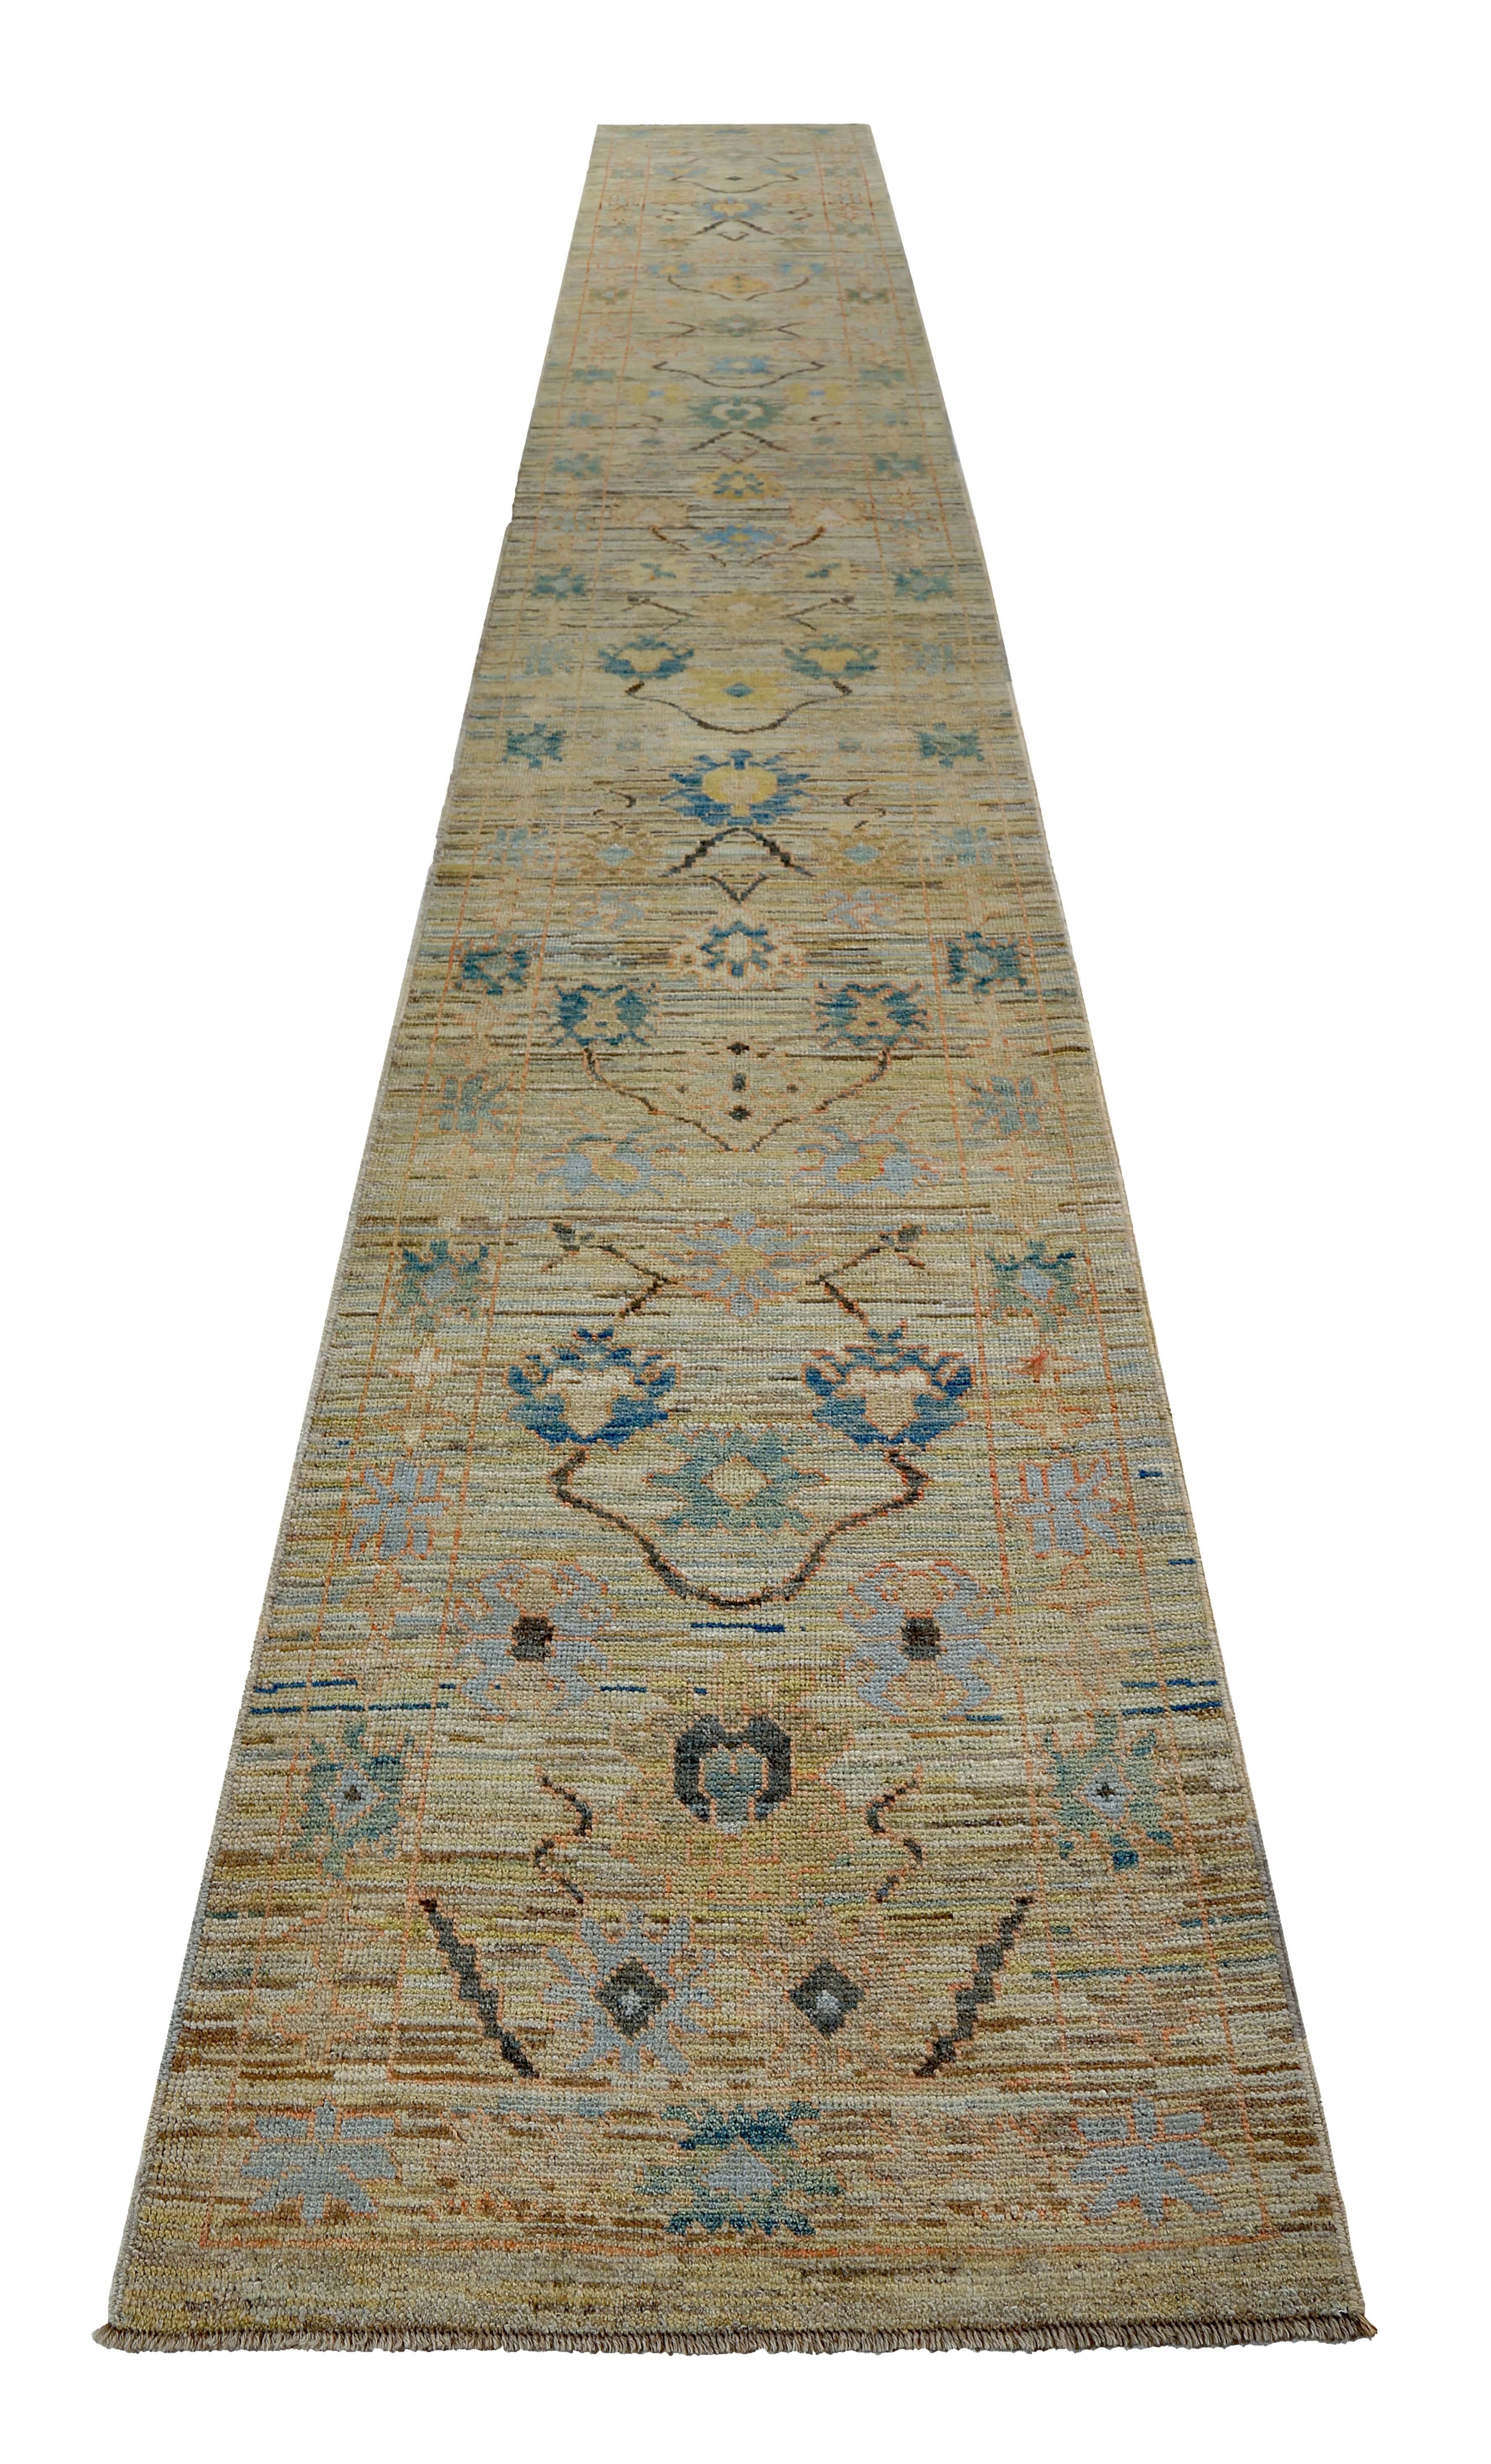 Turkish runner rug made of handwoven sheep’s wool of the finest quality. It’s colored with organic vegetable dyes that are certified safe for humans and pets alike. It features green and blue floral details on a lovely ivory field. Flower patterns